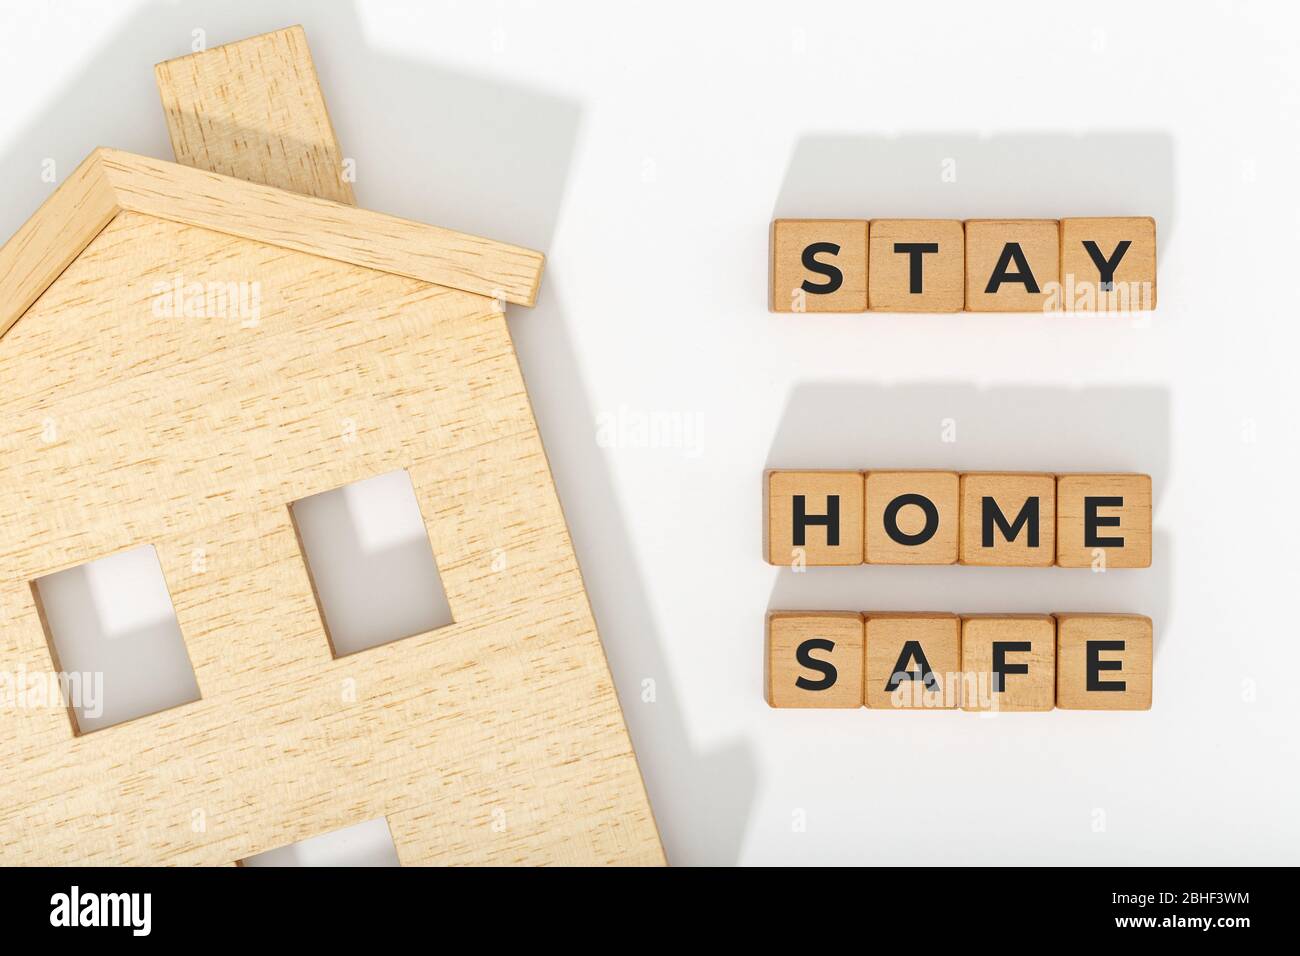 Stay at home stay safe concept. Coronavirus COVID-19 outbreak advice. Home icon and wooden blocks on white background Stock Photo